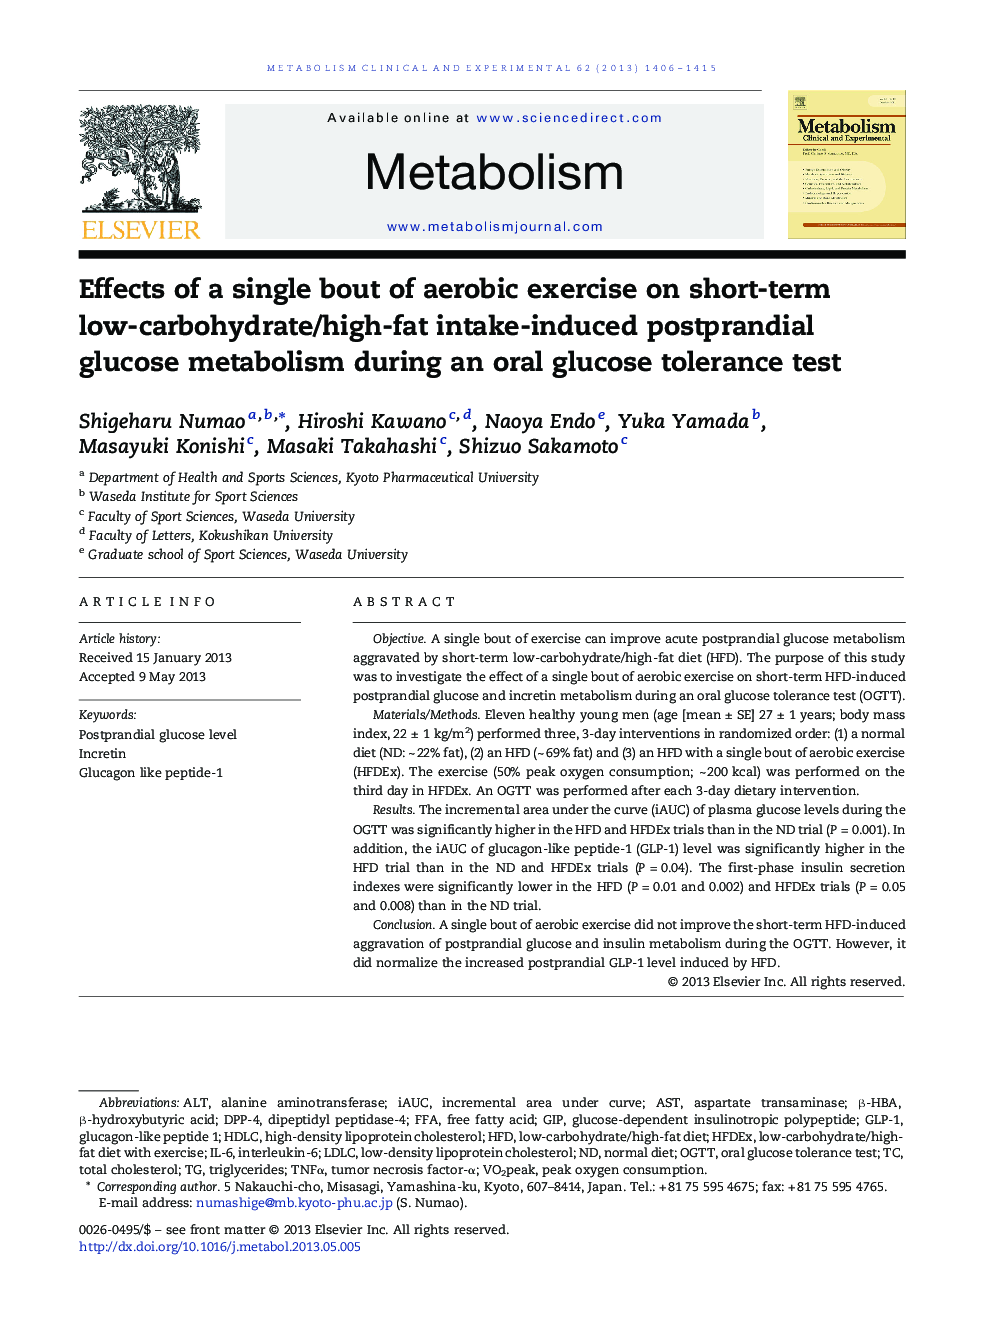 Effects of a single bout of aerobic exercise on short-term low-carbohydrate/high-fat intake-induced postprandial glucose metabolism during an oral glucose tolerance test